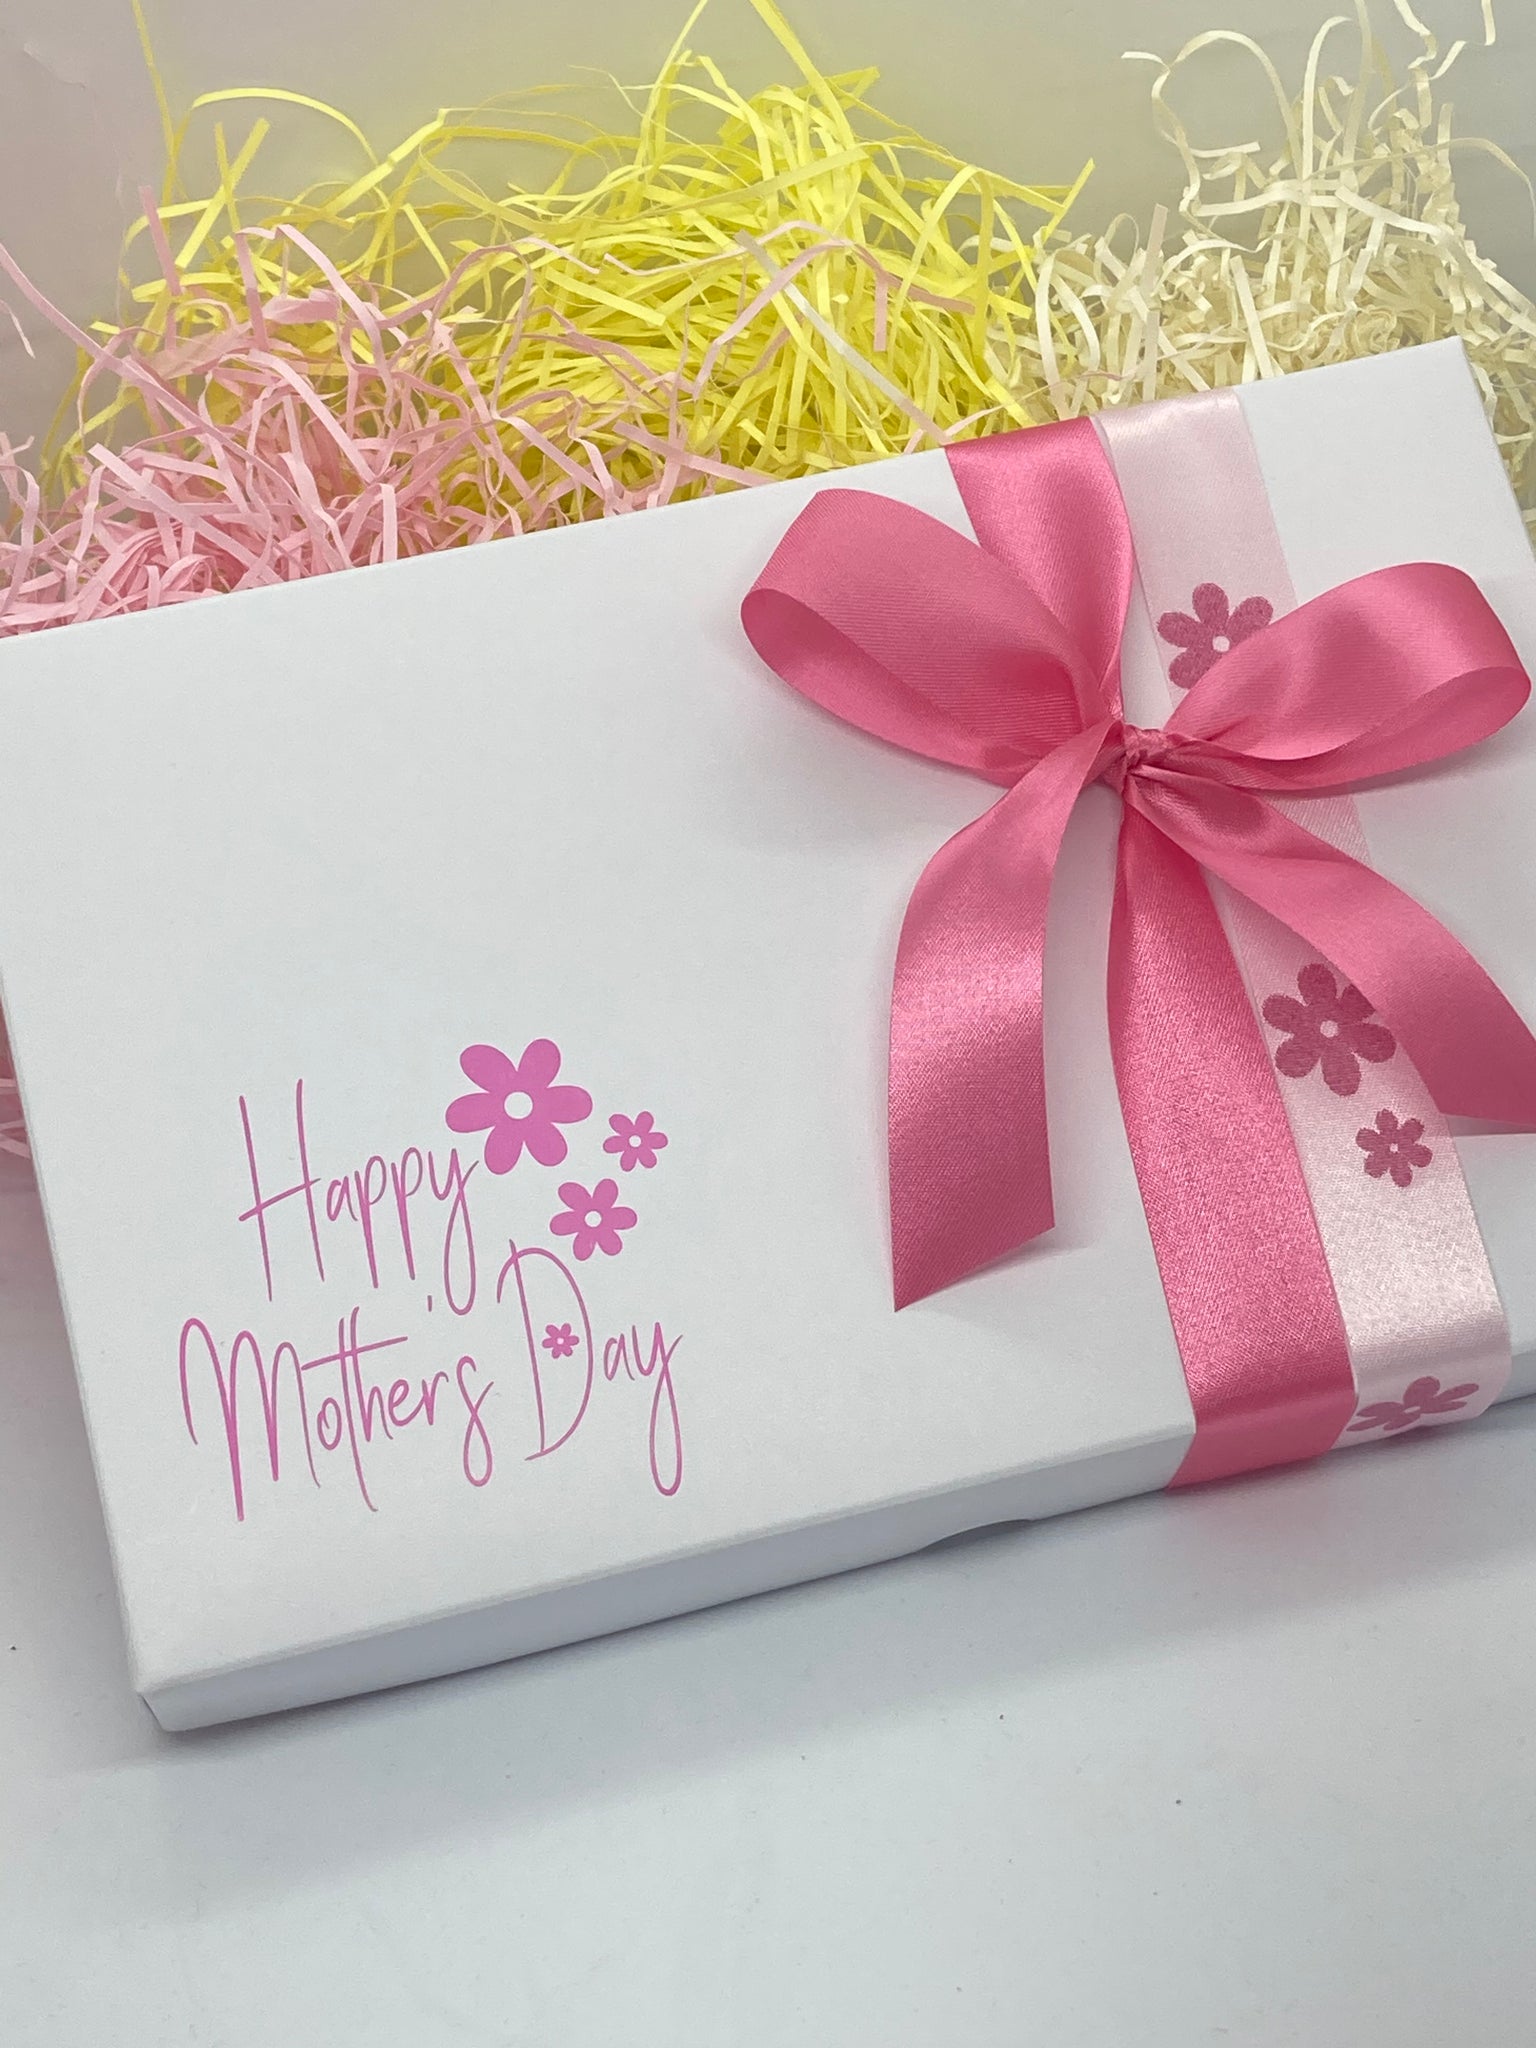 MOTHER’S DAY FLOWER SOLID WHITE LID GIFT BOX 240x155x30mm